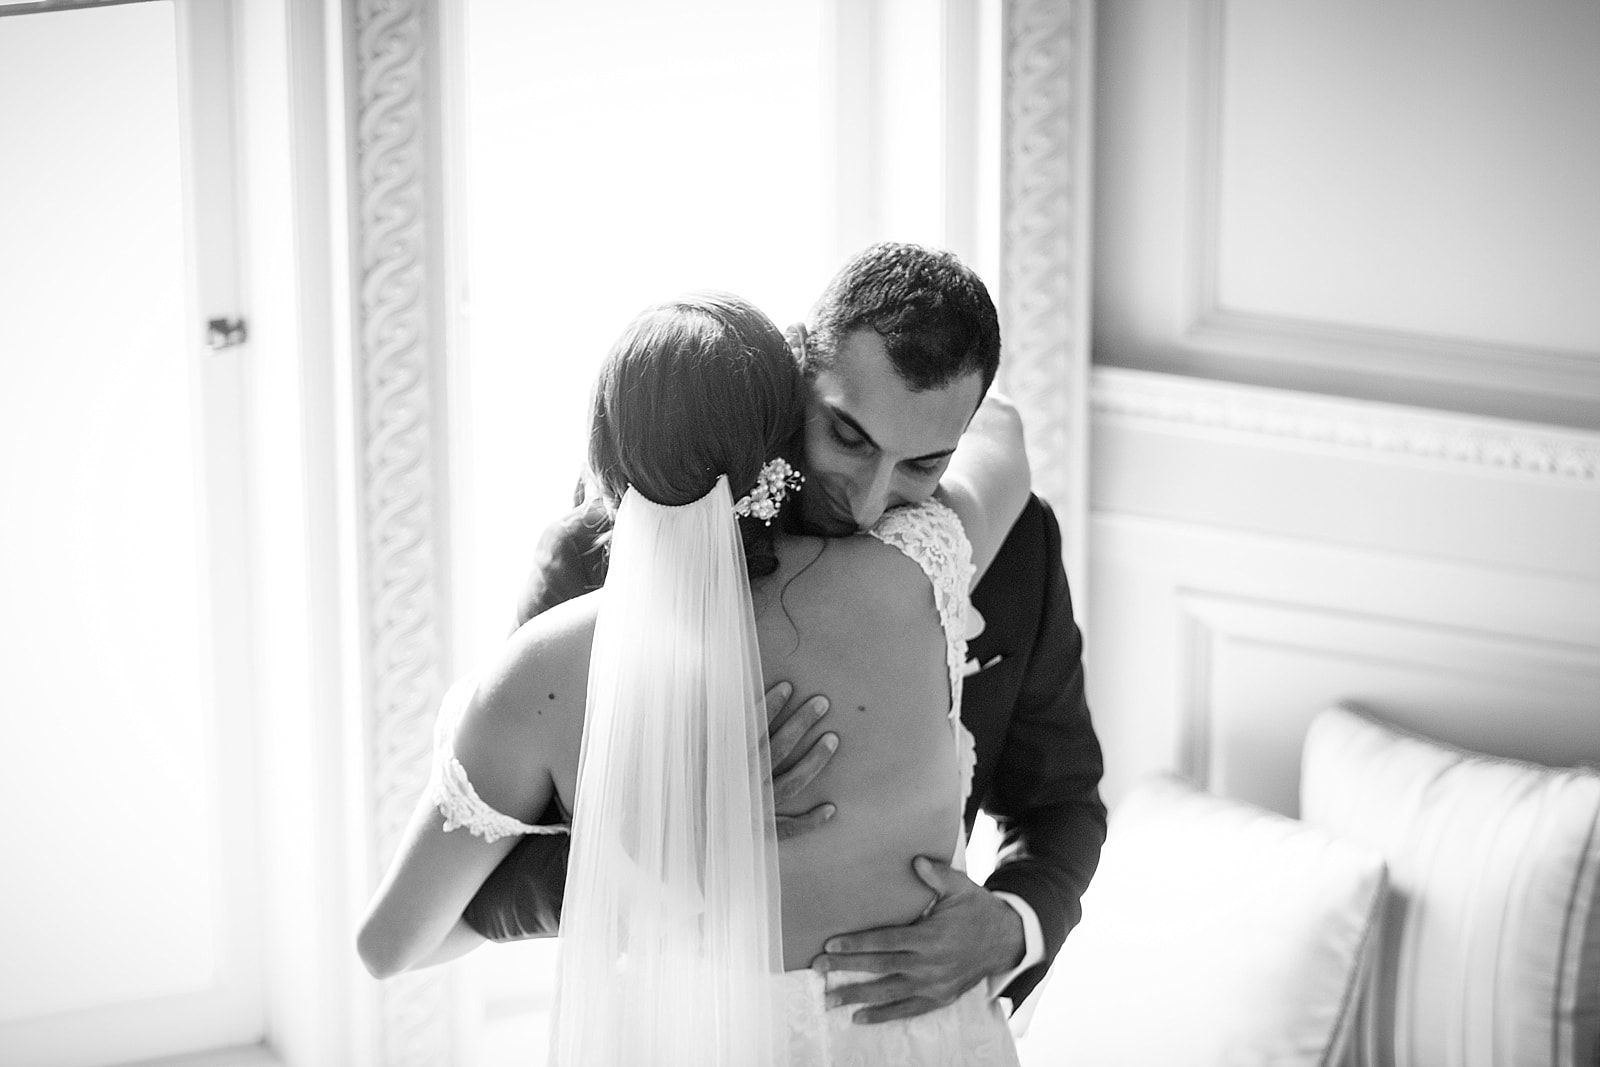 Bride and groom portrait, bride and groom first look, bride and groom hugging, intimate wedding portrait, black and white 